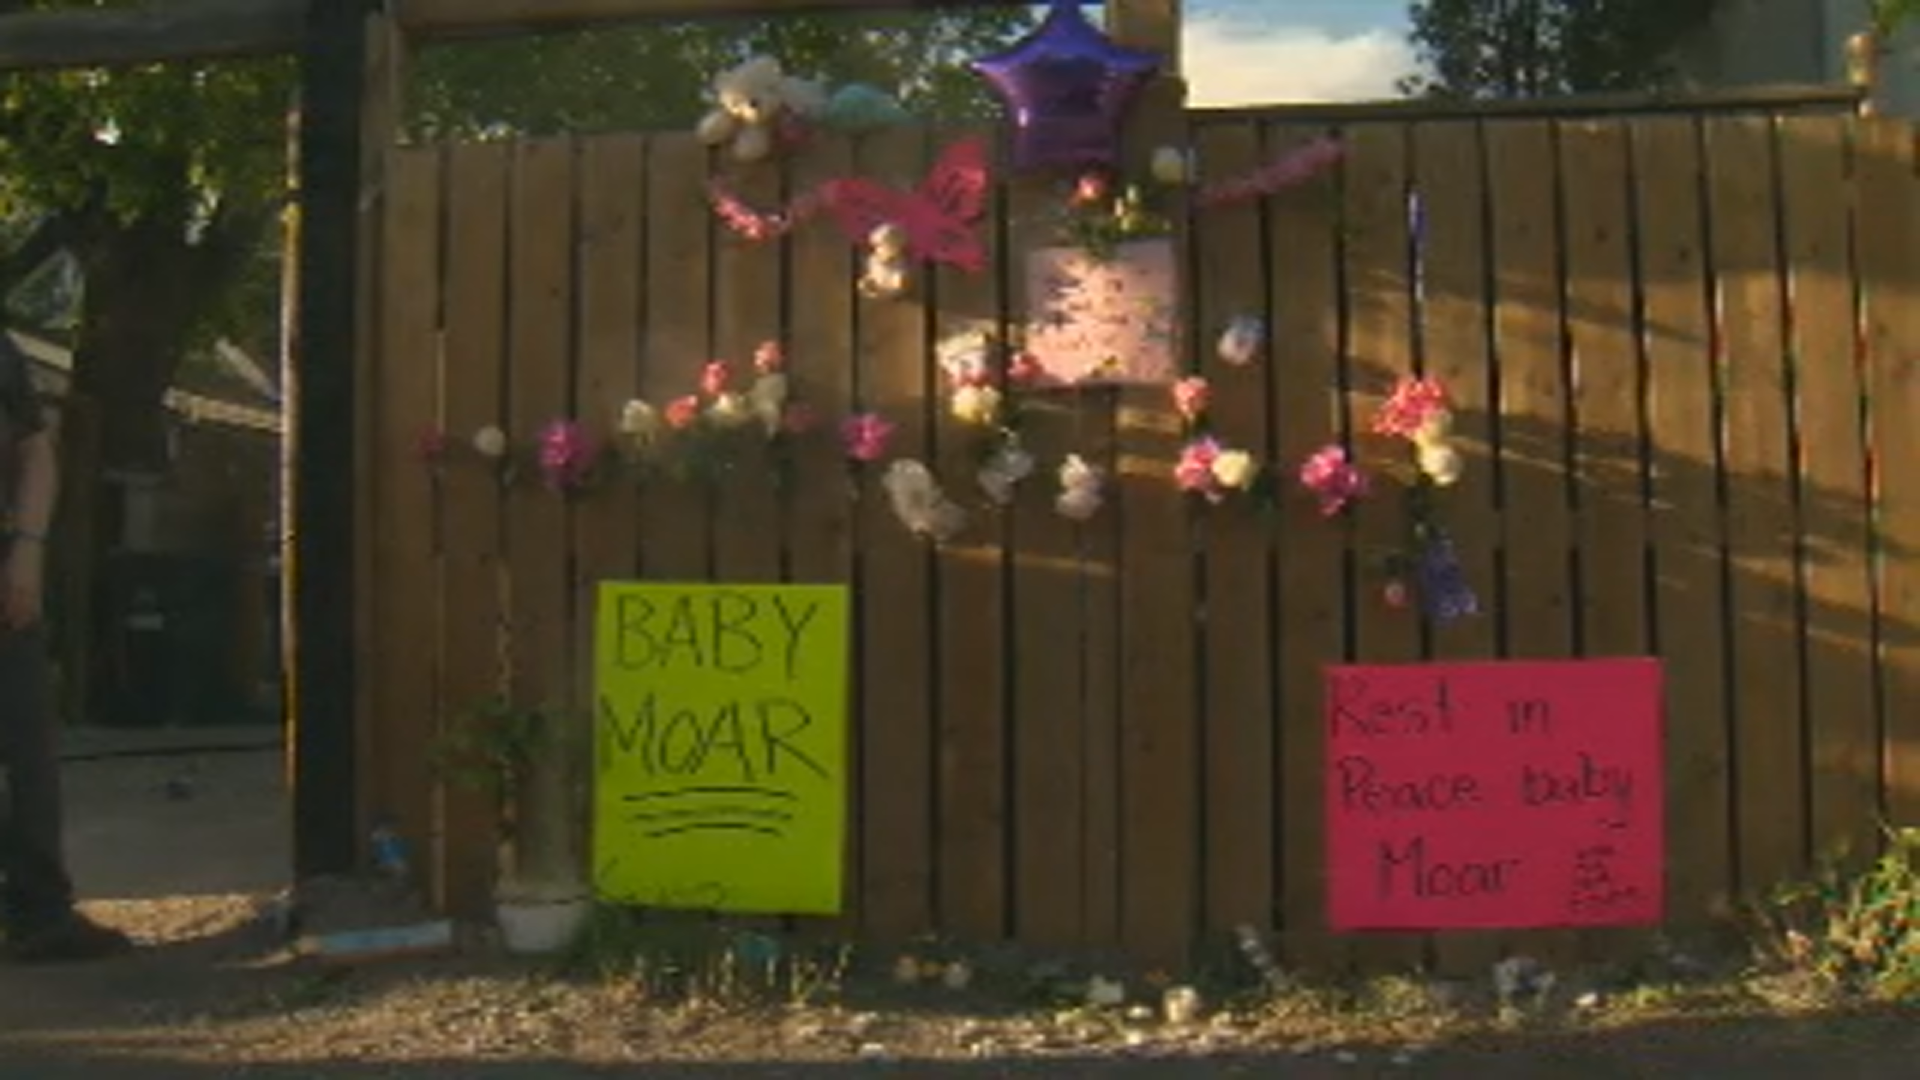 Flowers and signs posted near the site of where an infant was found in a garbage bin.